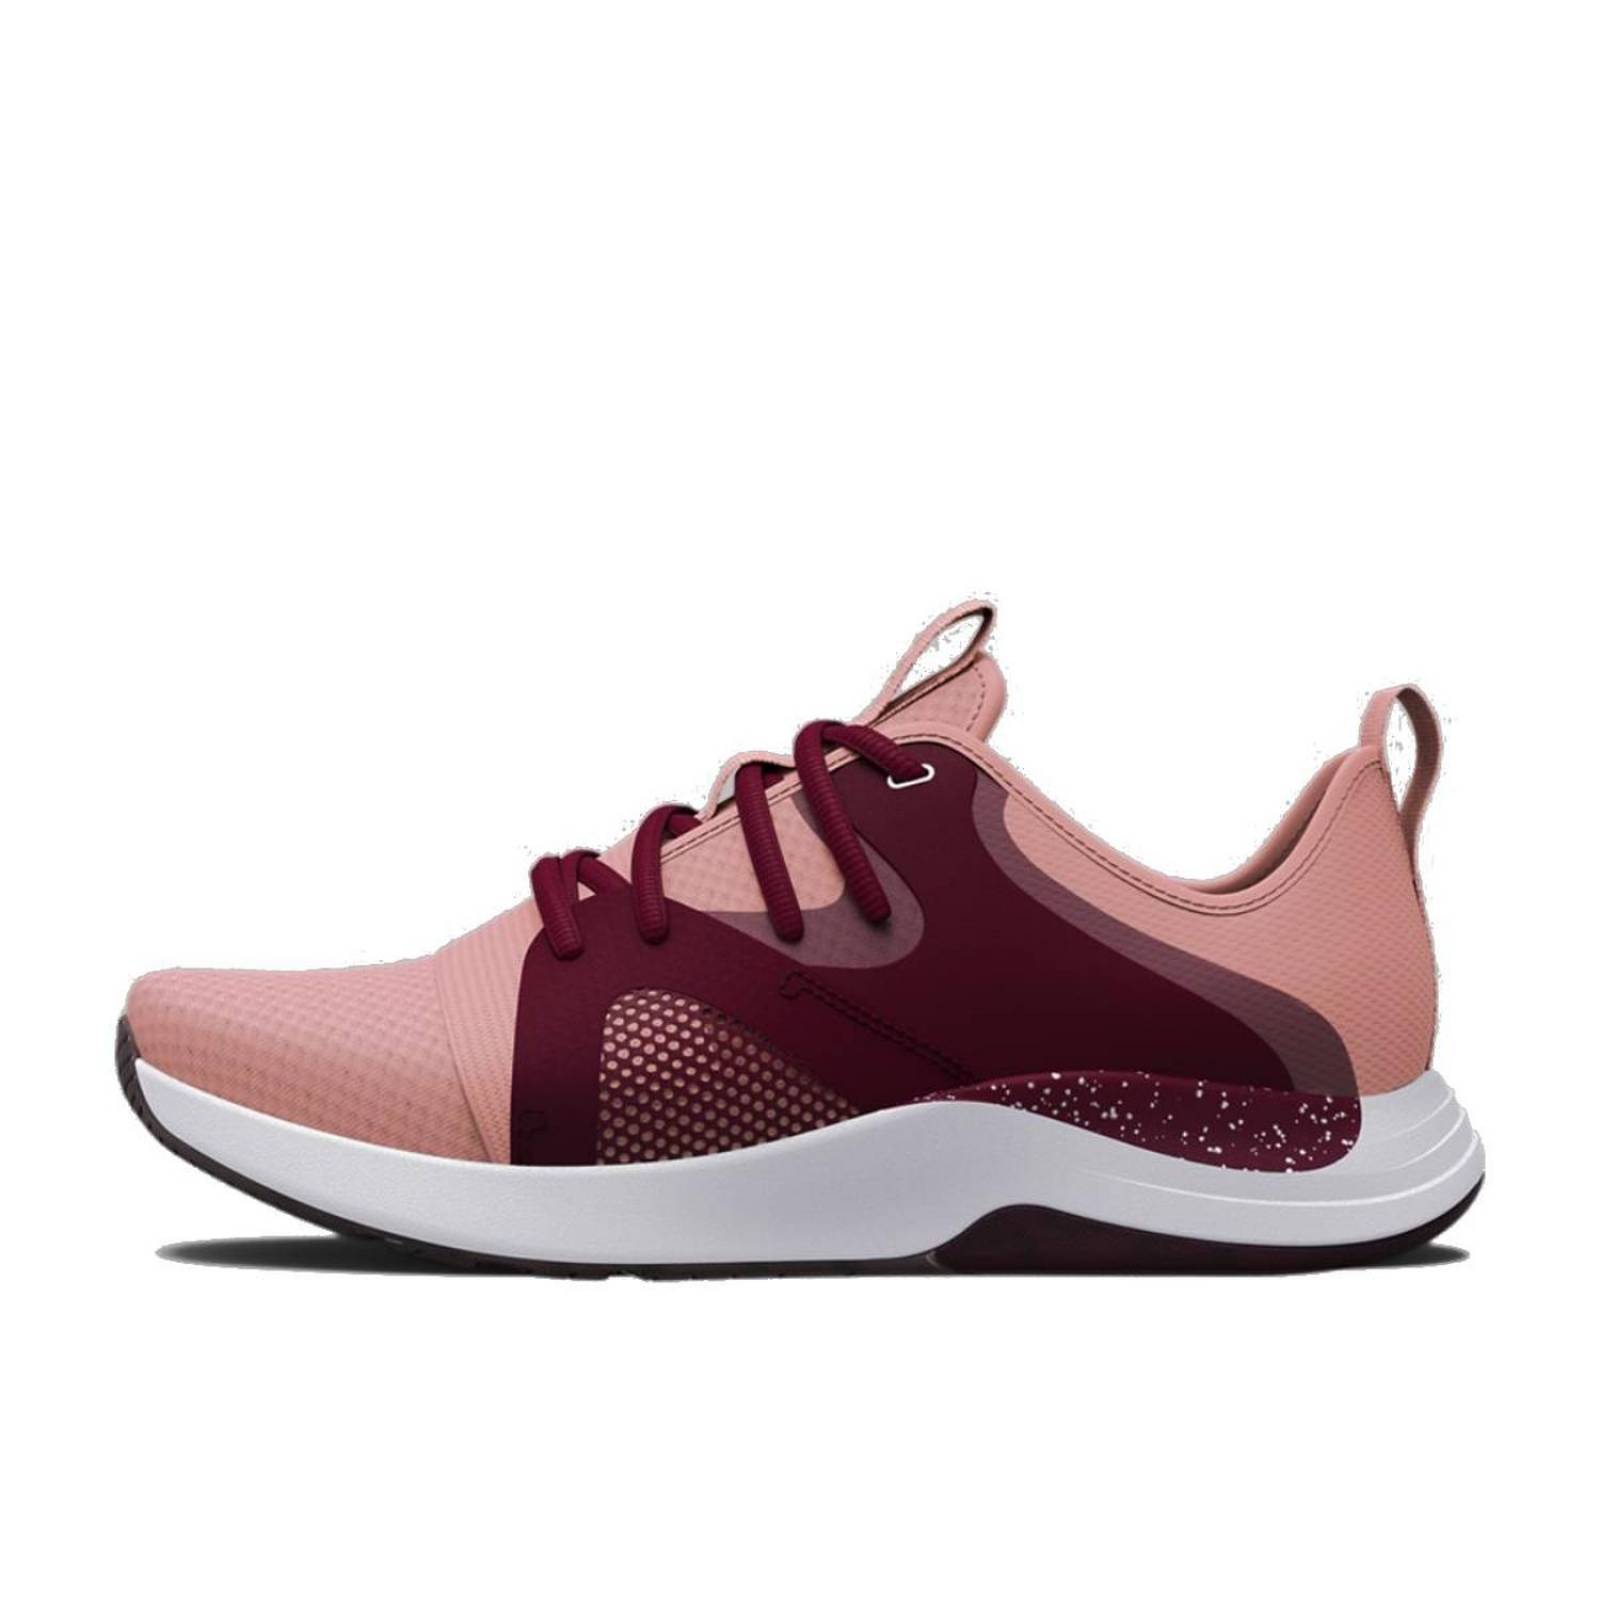 Tenis Under Armour Mujer Gris Rosa W Breathe 3021822100